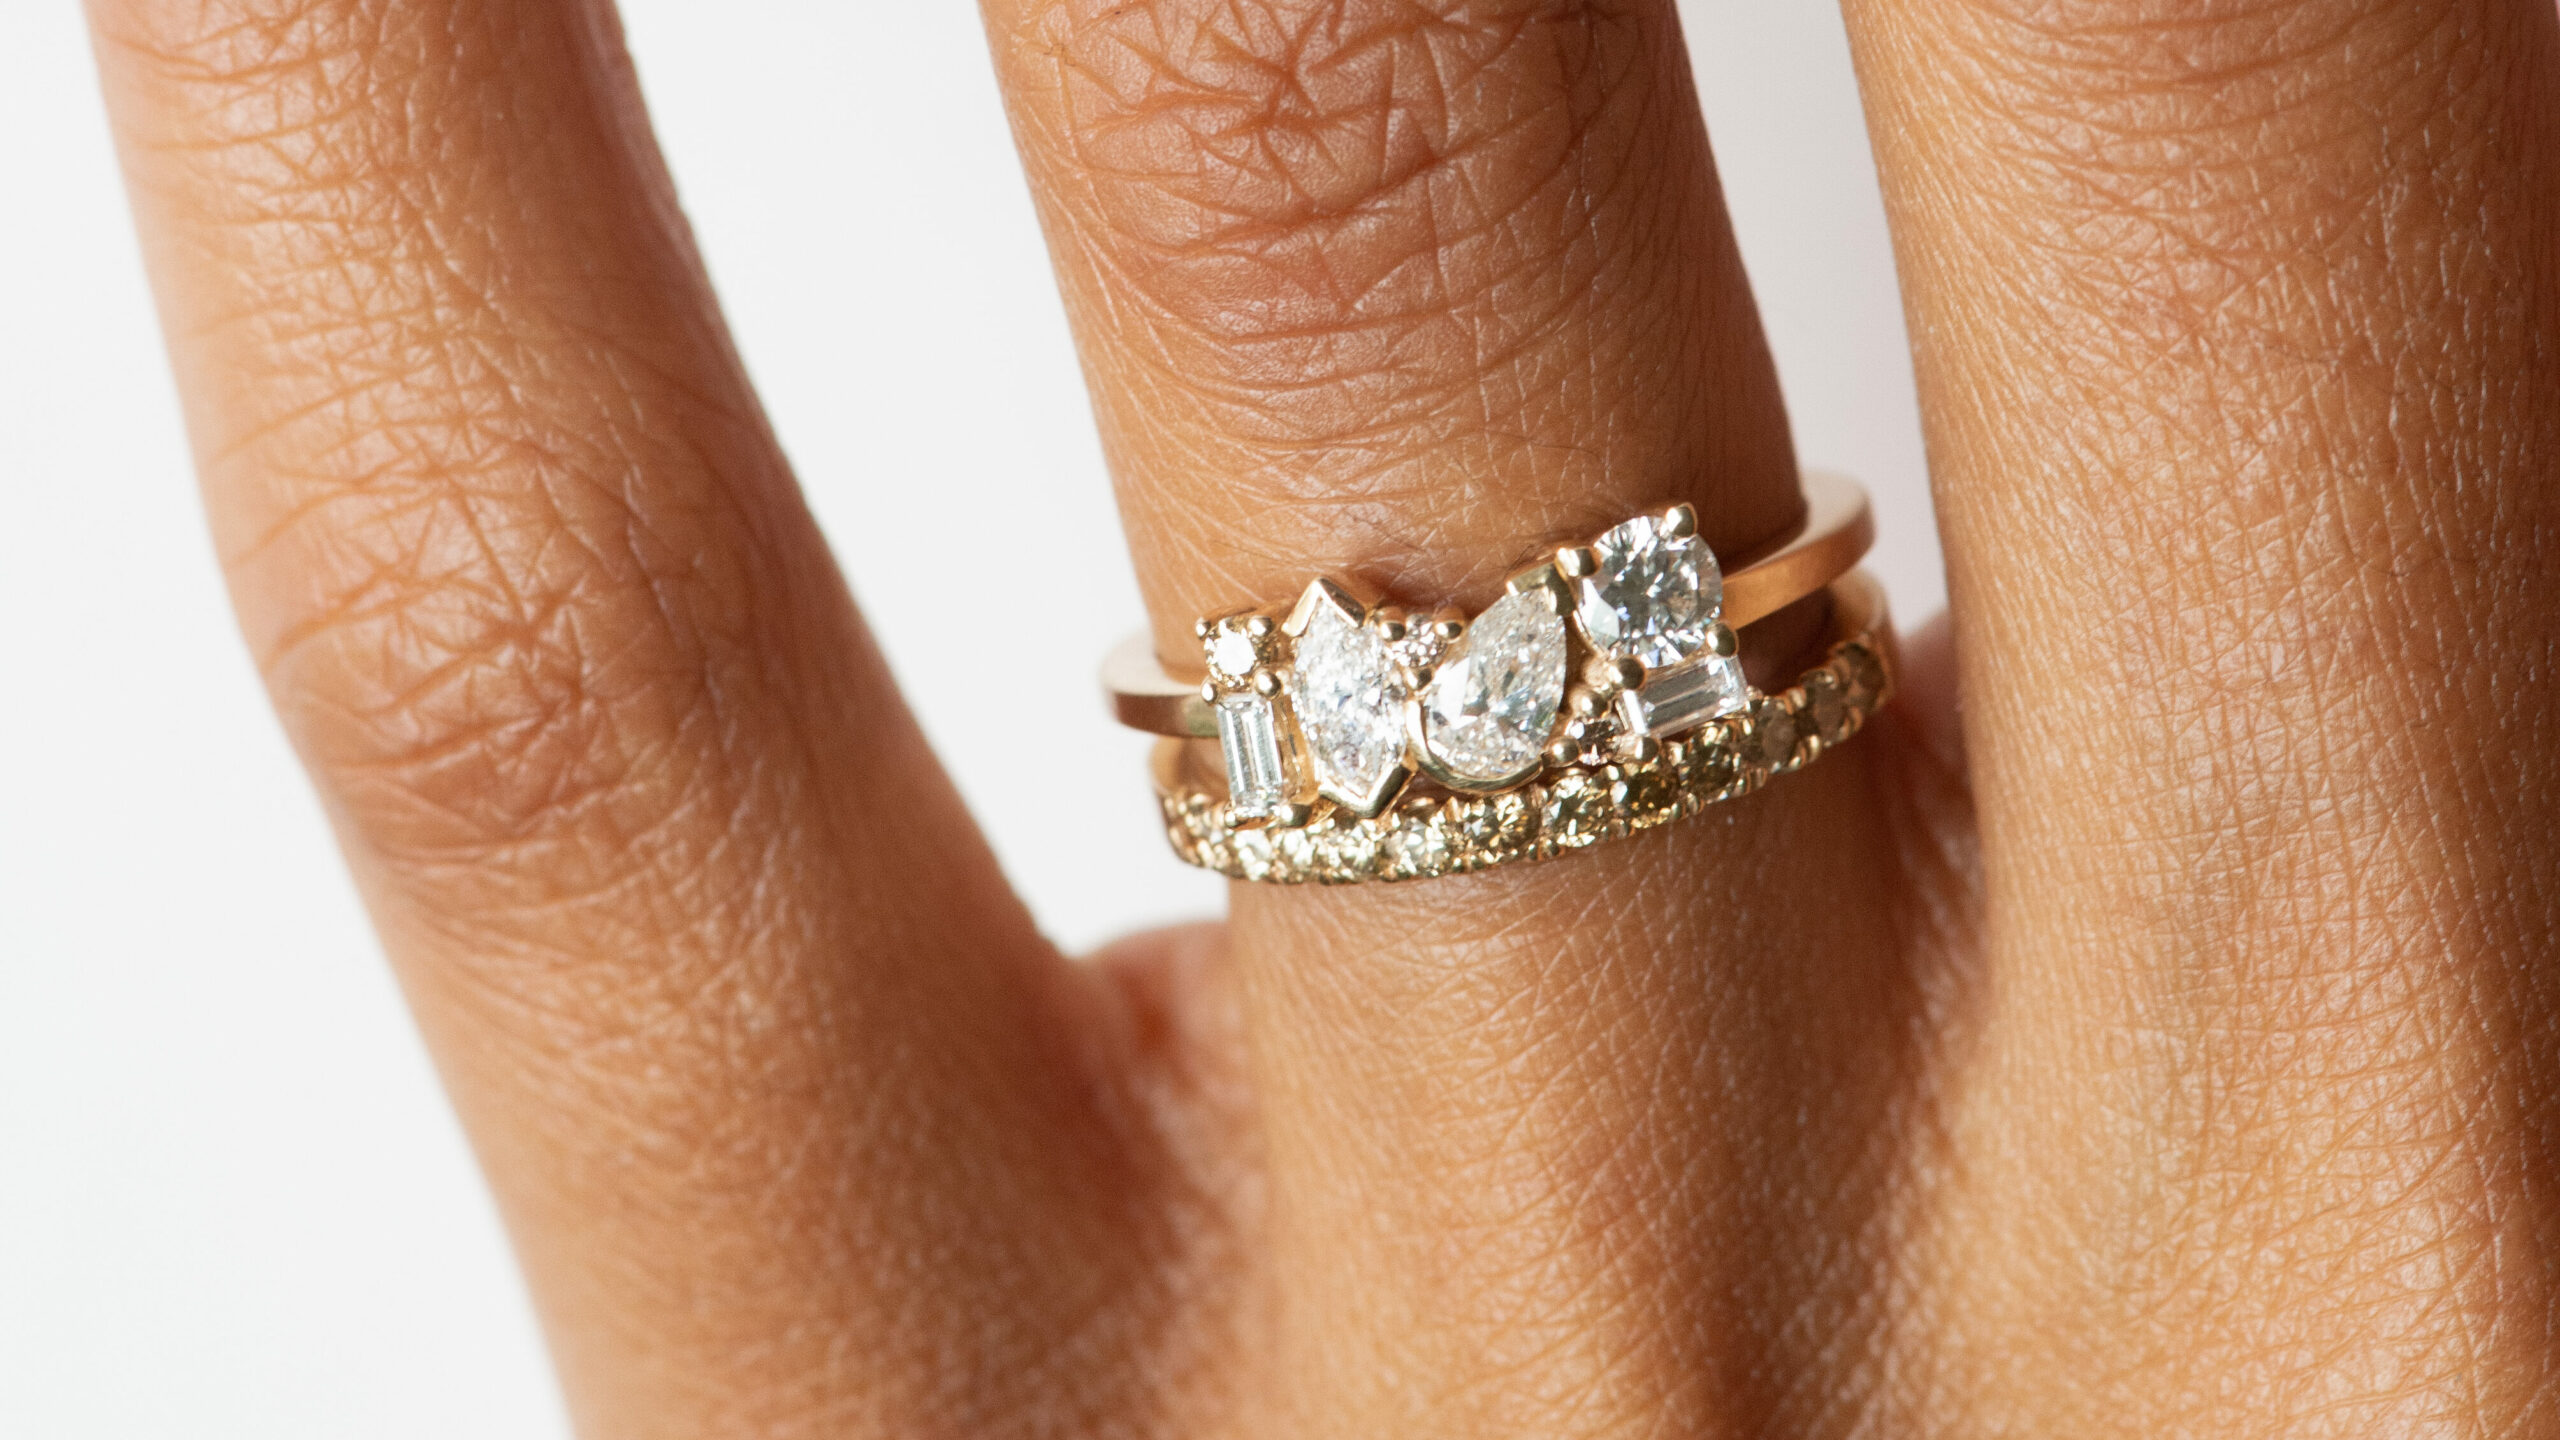 Close up of a hand wearing two rings; One linear cluster diamond ring, where each diamond is set in a different cut, and another linear yellow sapphire band.